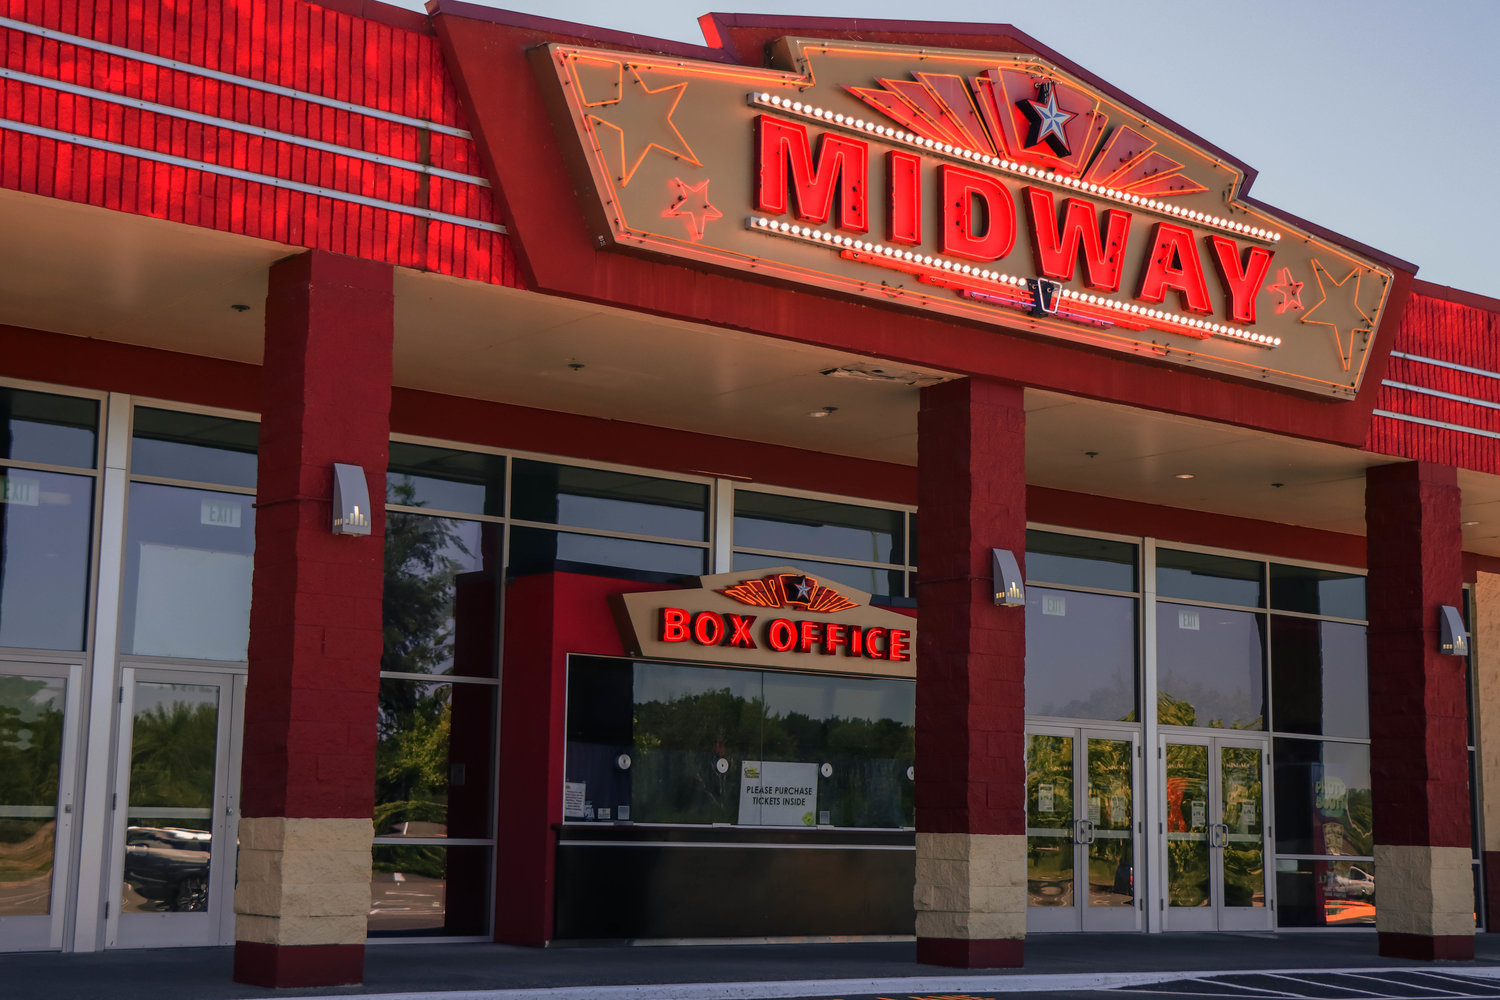 Midway Cinema is located at 181 NE Hampe Way in Chehalis.